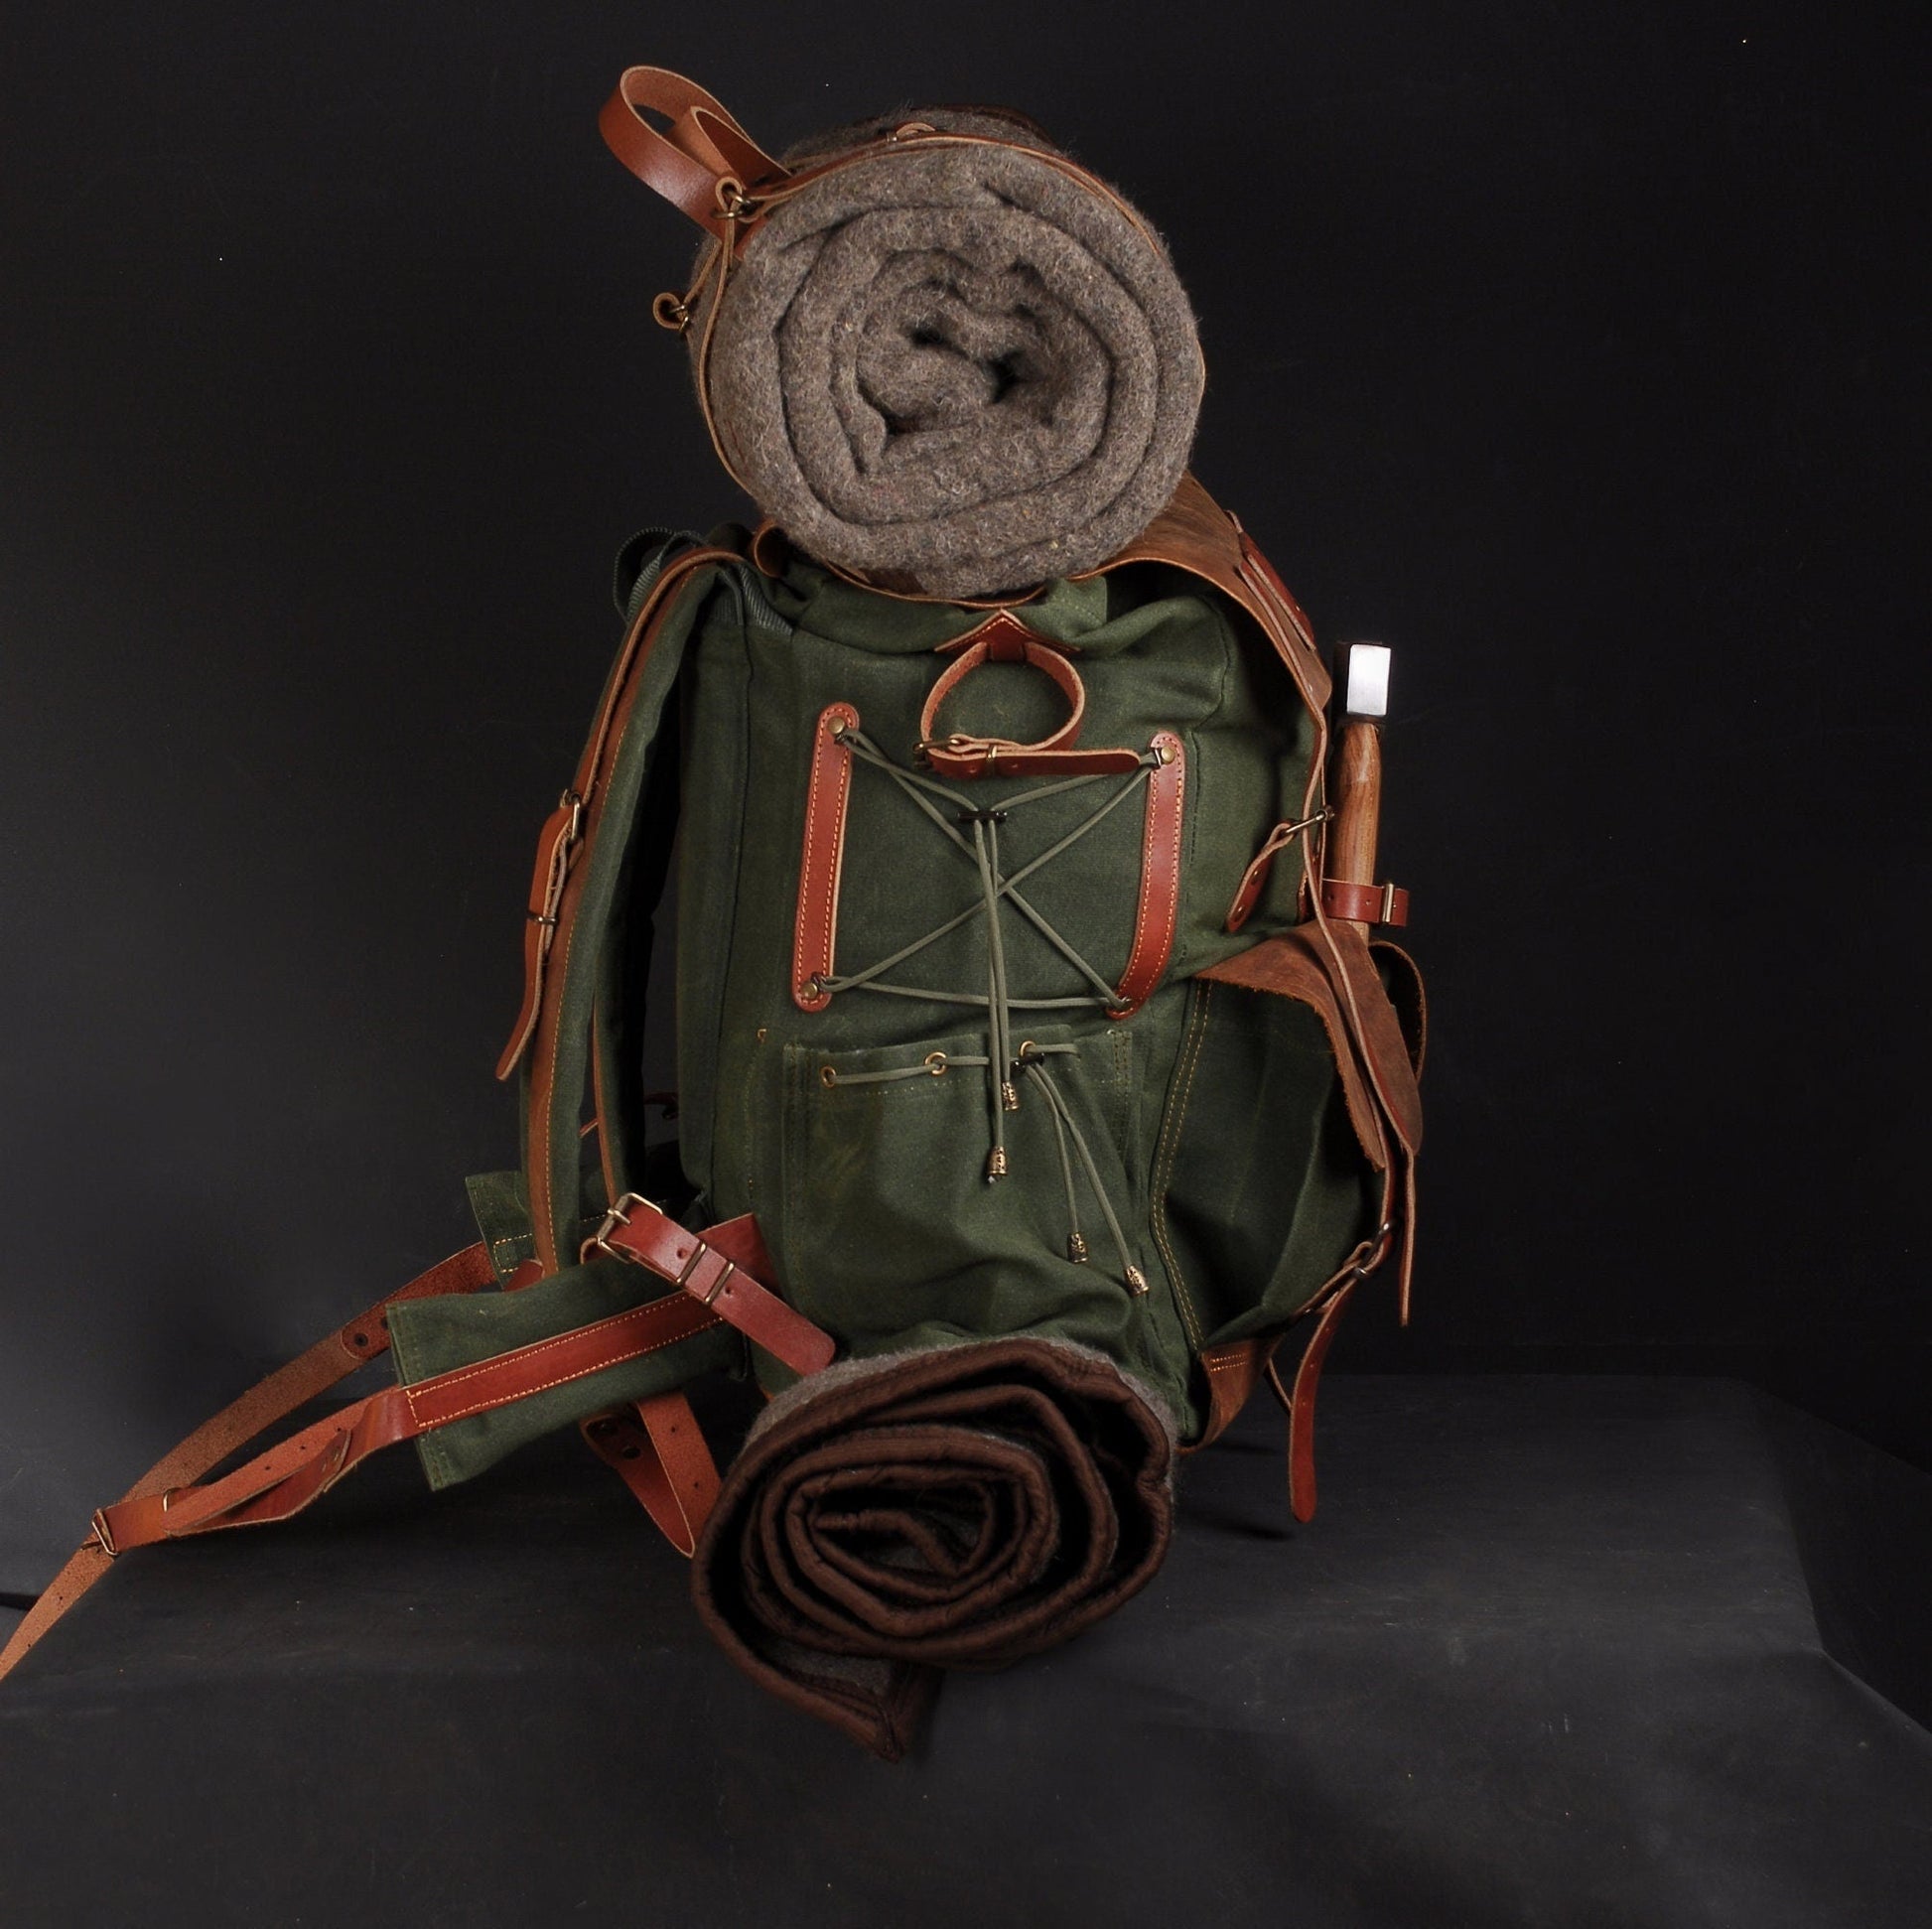 24 Hours Tested Backpack | 50L | Custom | Leather | Canvas | Bushcraft Backpack | Camping Backpack | Bushcraft  | Camping | Hiking | Bag | Rucksack bushcraft backpack - camping backpack - hiking backpack 99percenthandmade   